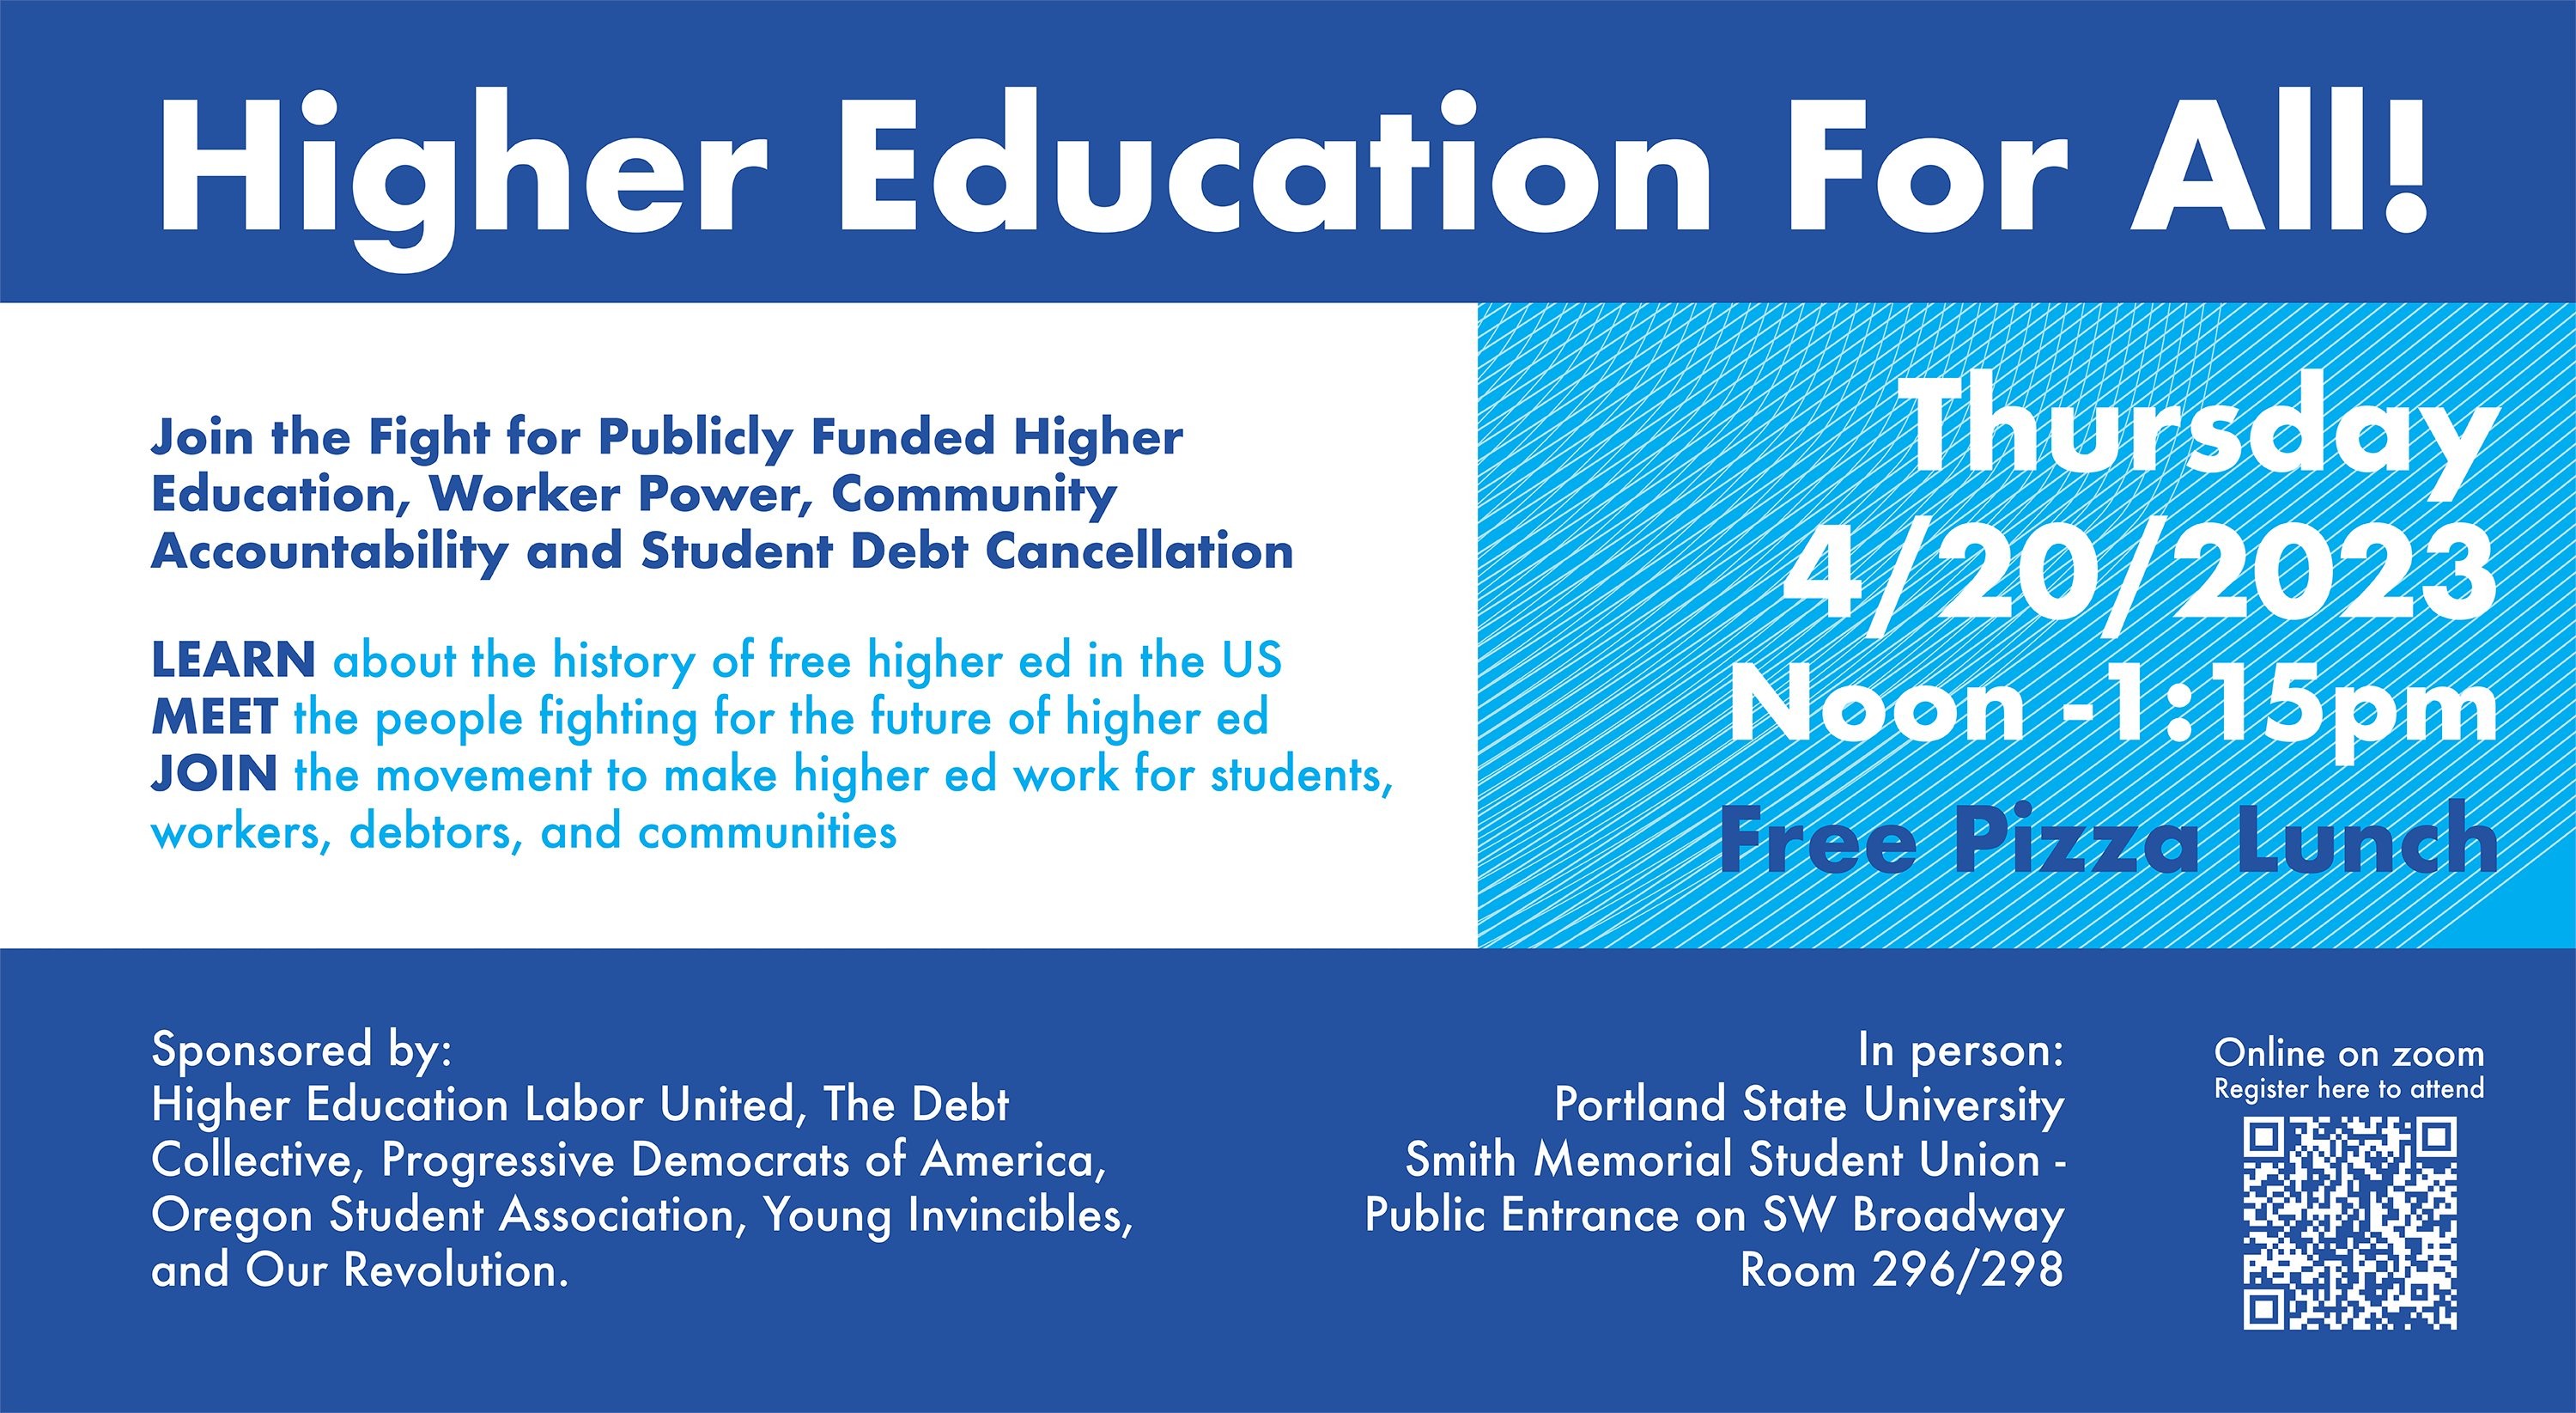 Higher Education for All Public Event